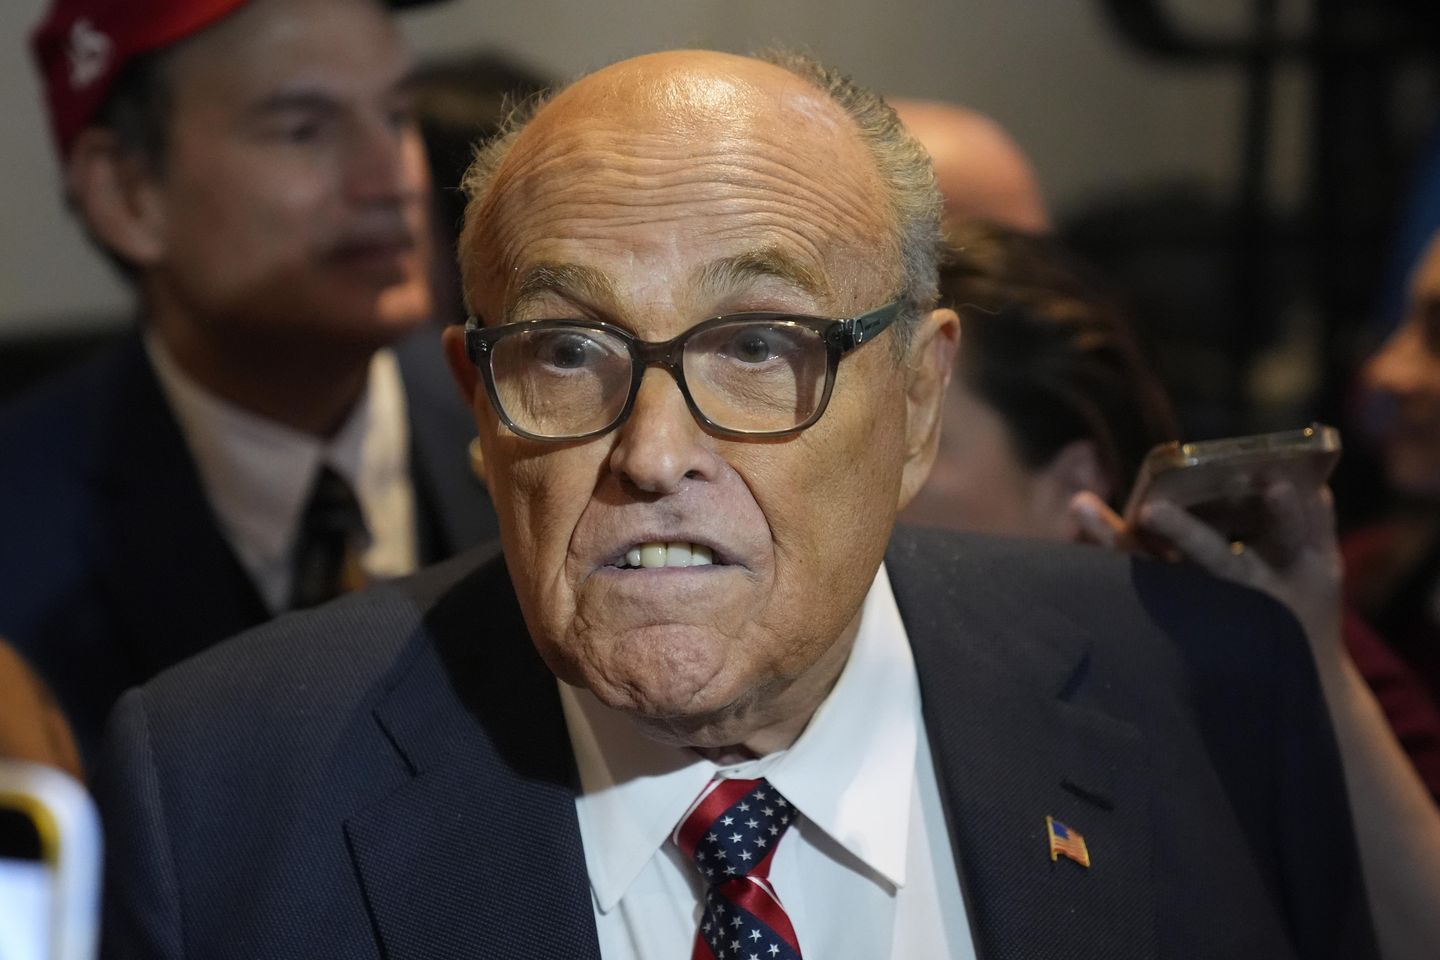 Arizona indicts 18 in case over 2020 election, including Giuliani and Meadows
